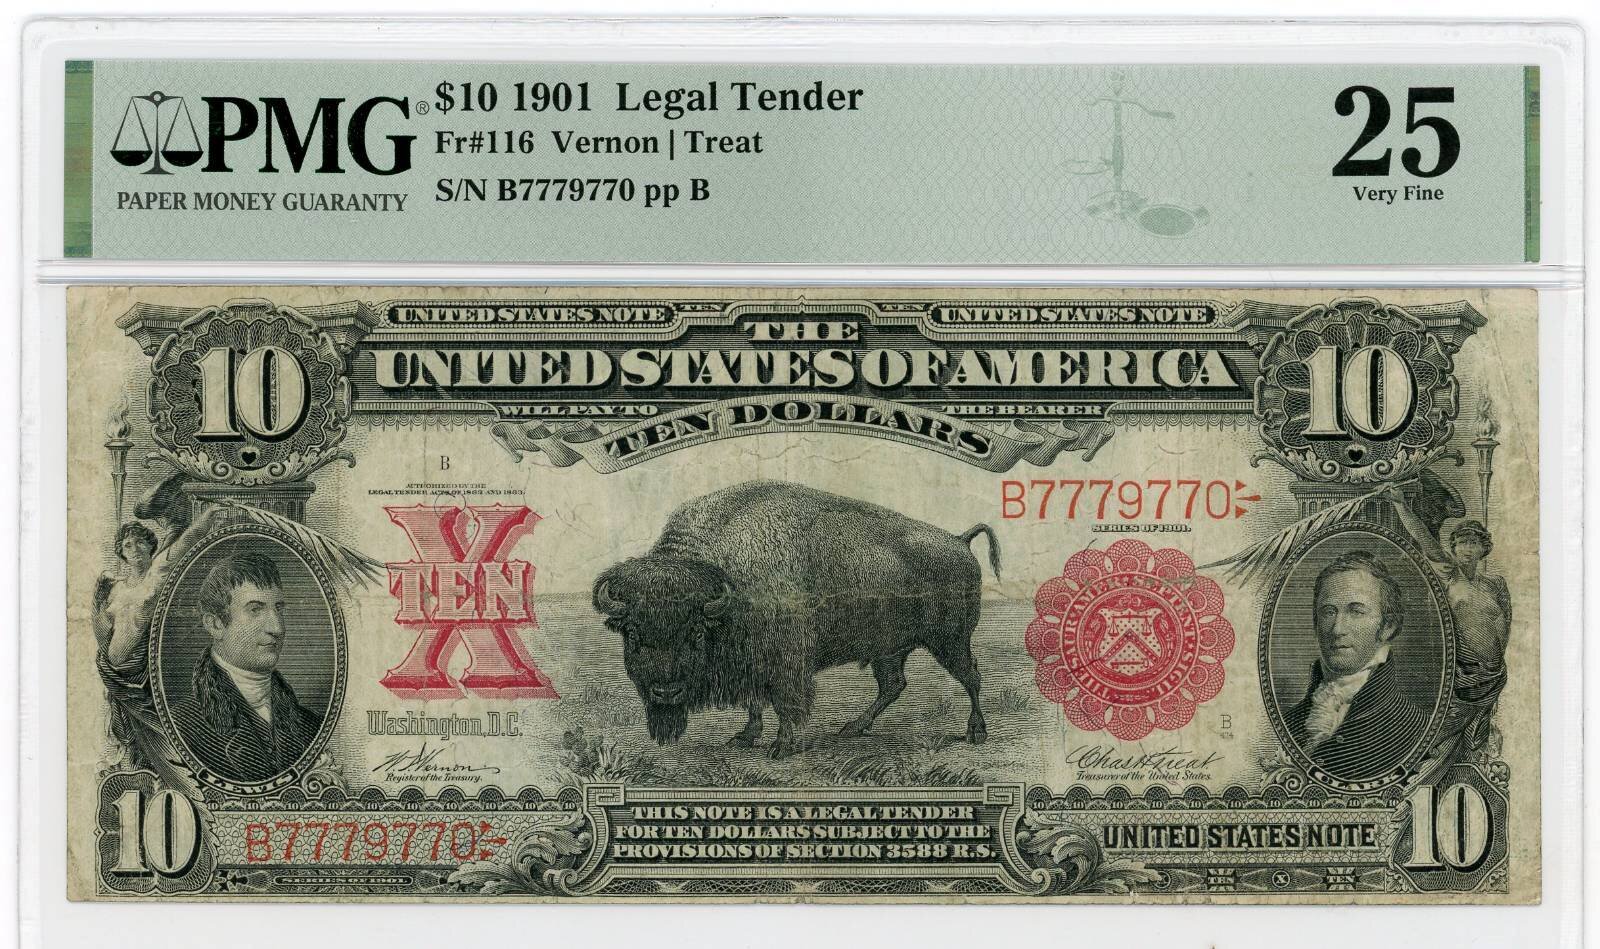 Featured item from the U.S. Graded Currency Sale!

US 116 1901 $10 Small Red Scalloped Legal Tender PMG 25

Auction ends: TONIGHT, Monday, December 4th at 6:58pm

Visit the &quot;Current Sales&quot; link in our profile to view the catalogue and bid.